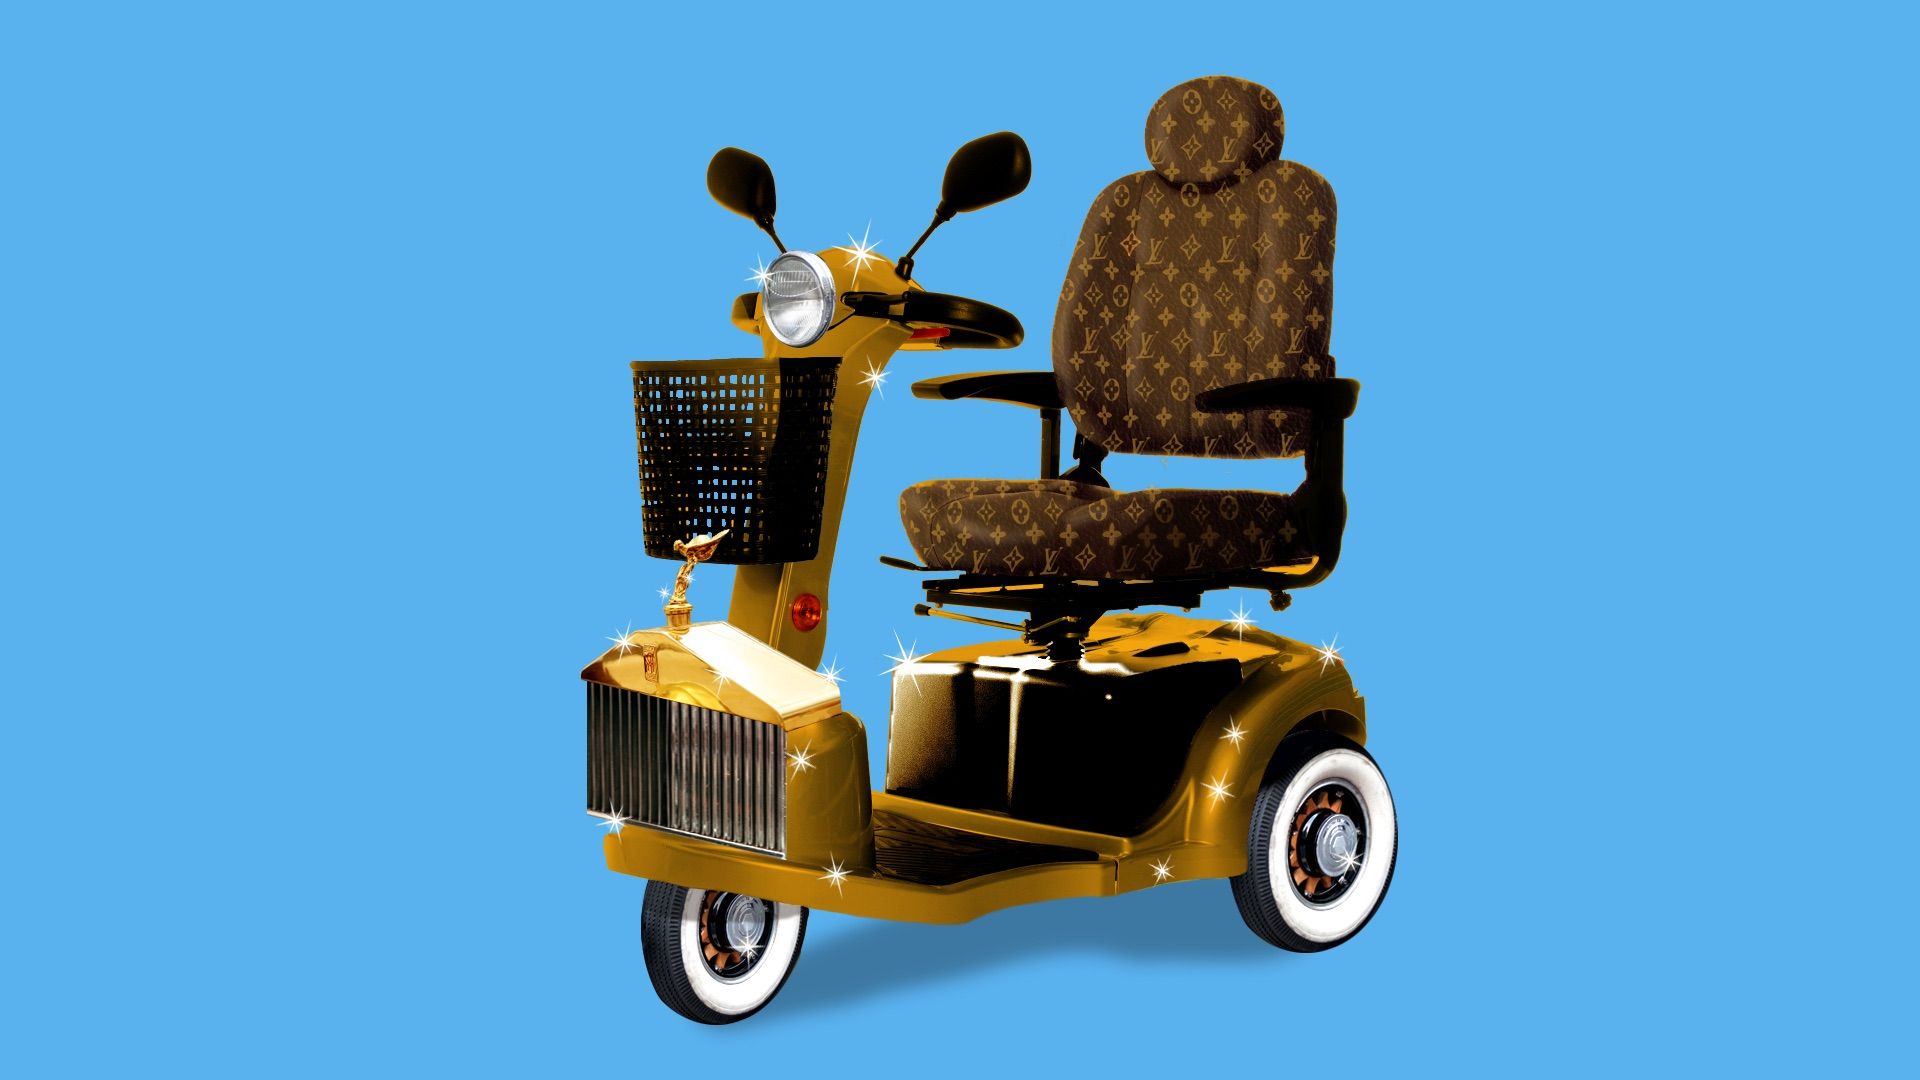 A motorized cart that is gold and really spiffy.